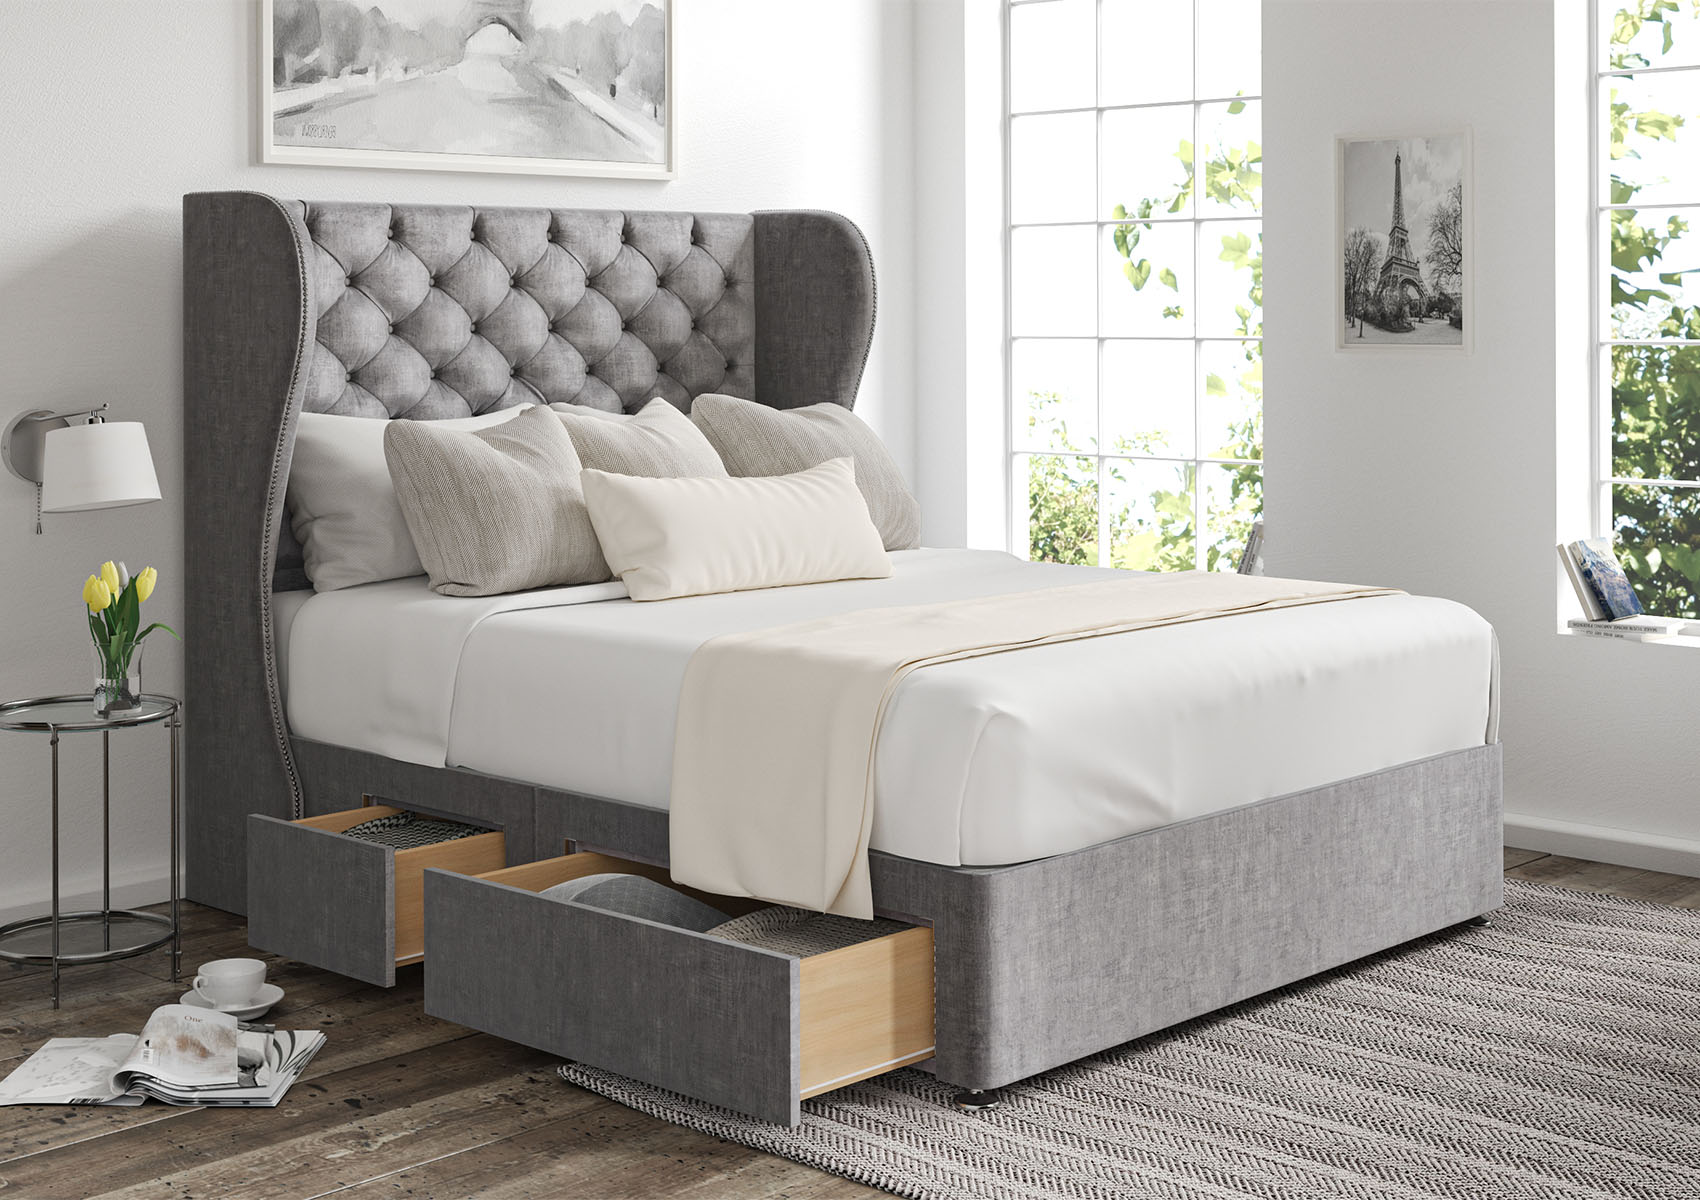 View Miami Arlington Ice Upholstered Single Winged Bed Time4Sleep information